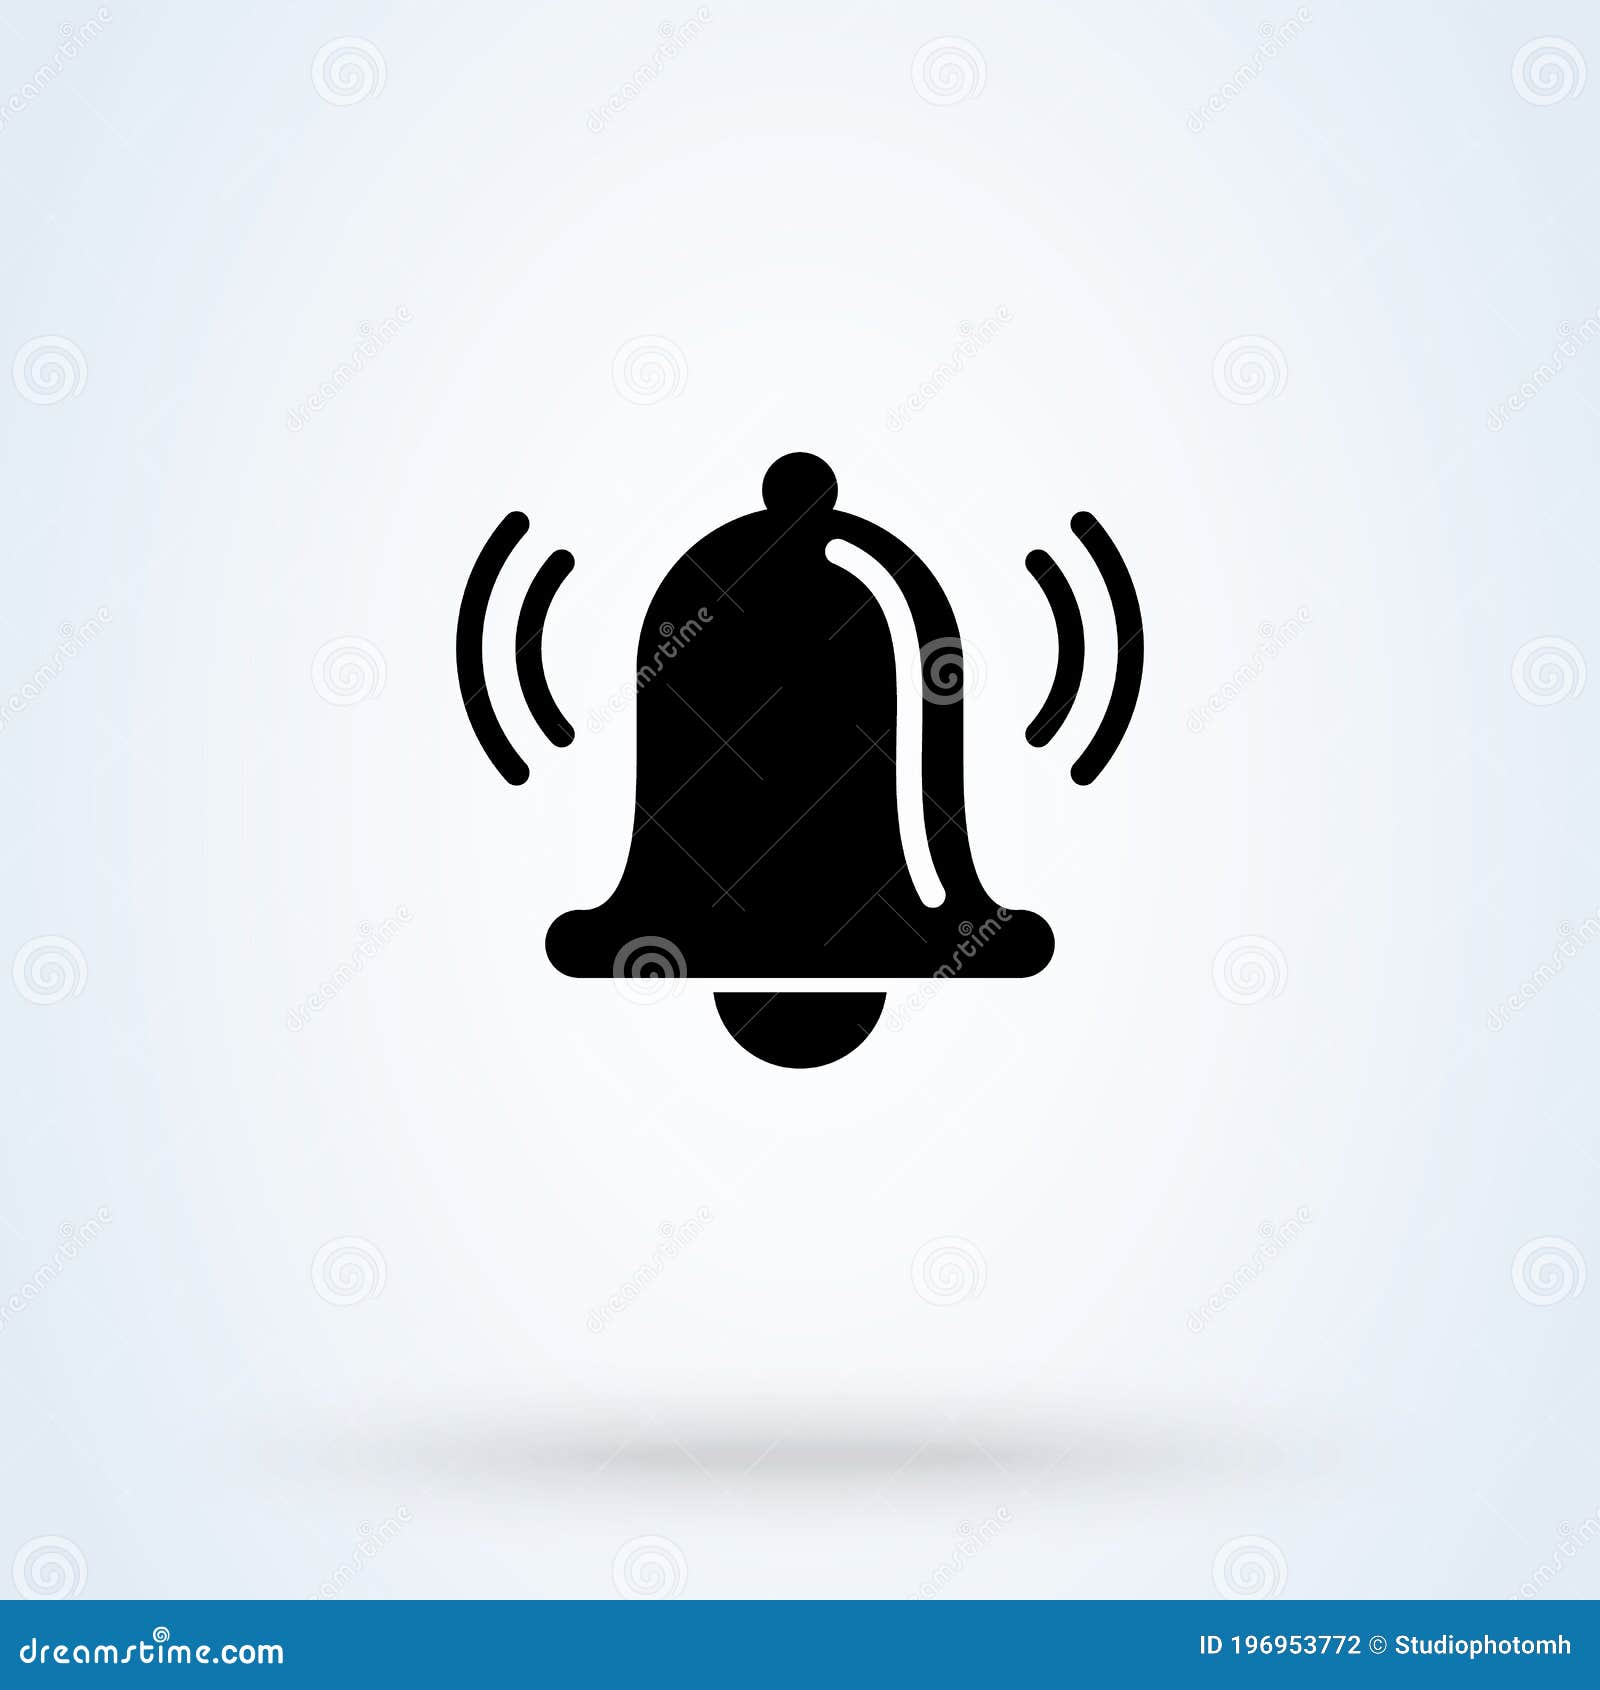 ringing bell sign icon or logo. notification concept. vibrate bell and alarm  